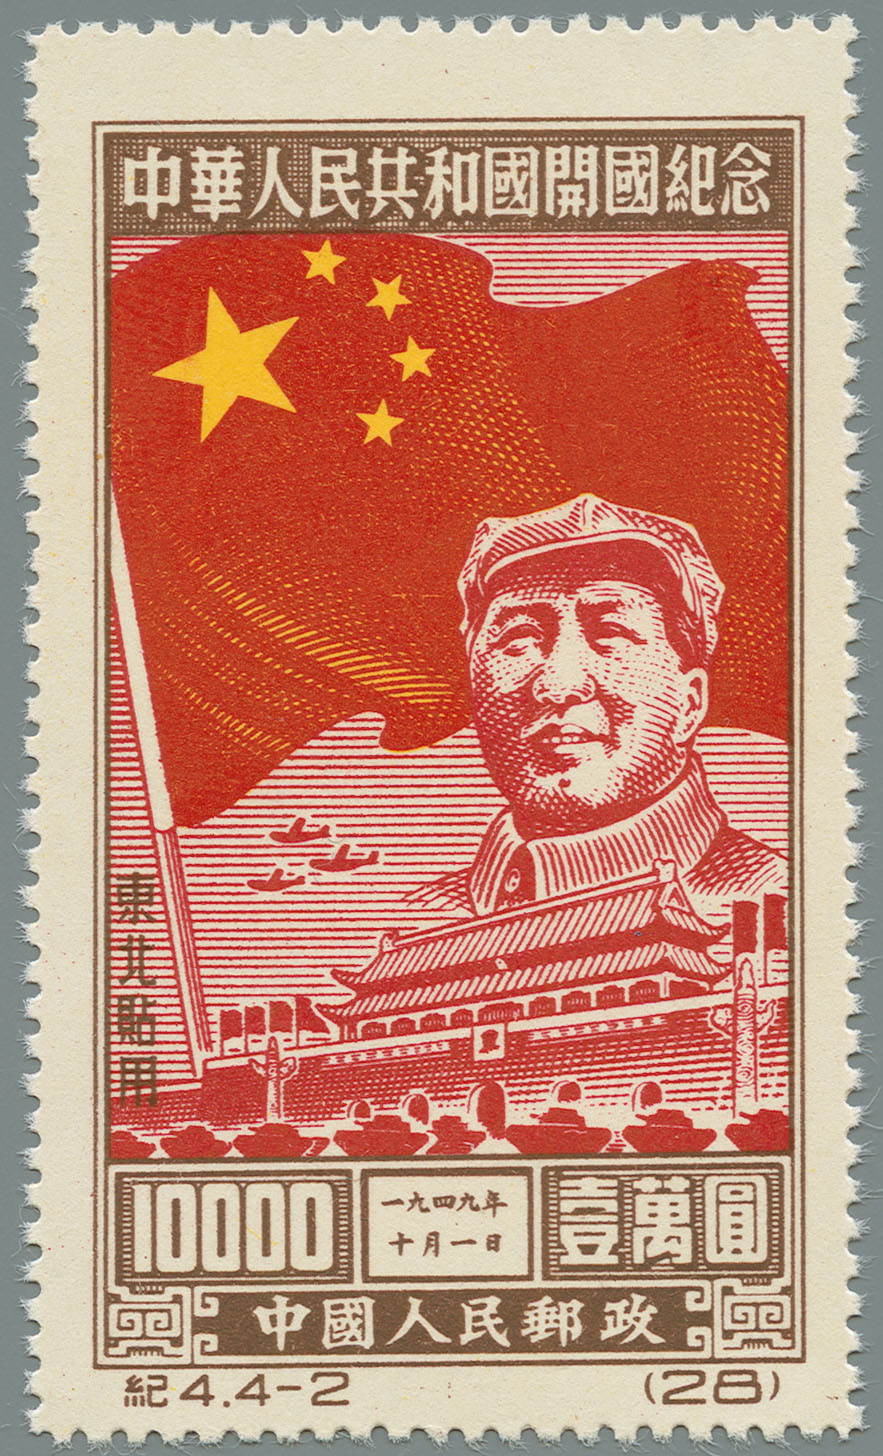 The Founding of the People's Republic of China (中華人民共和國開國 